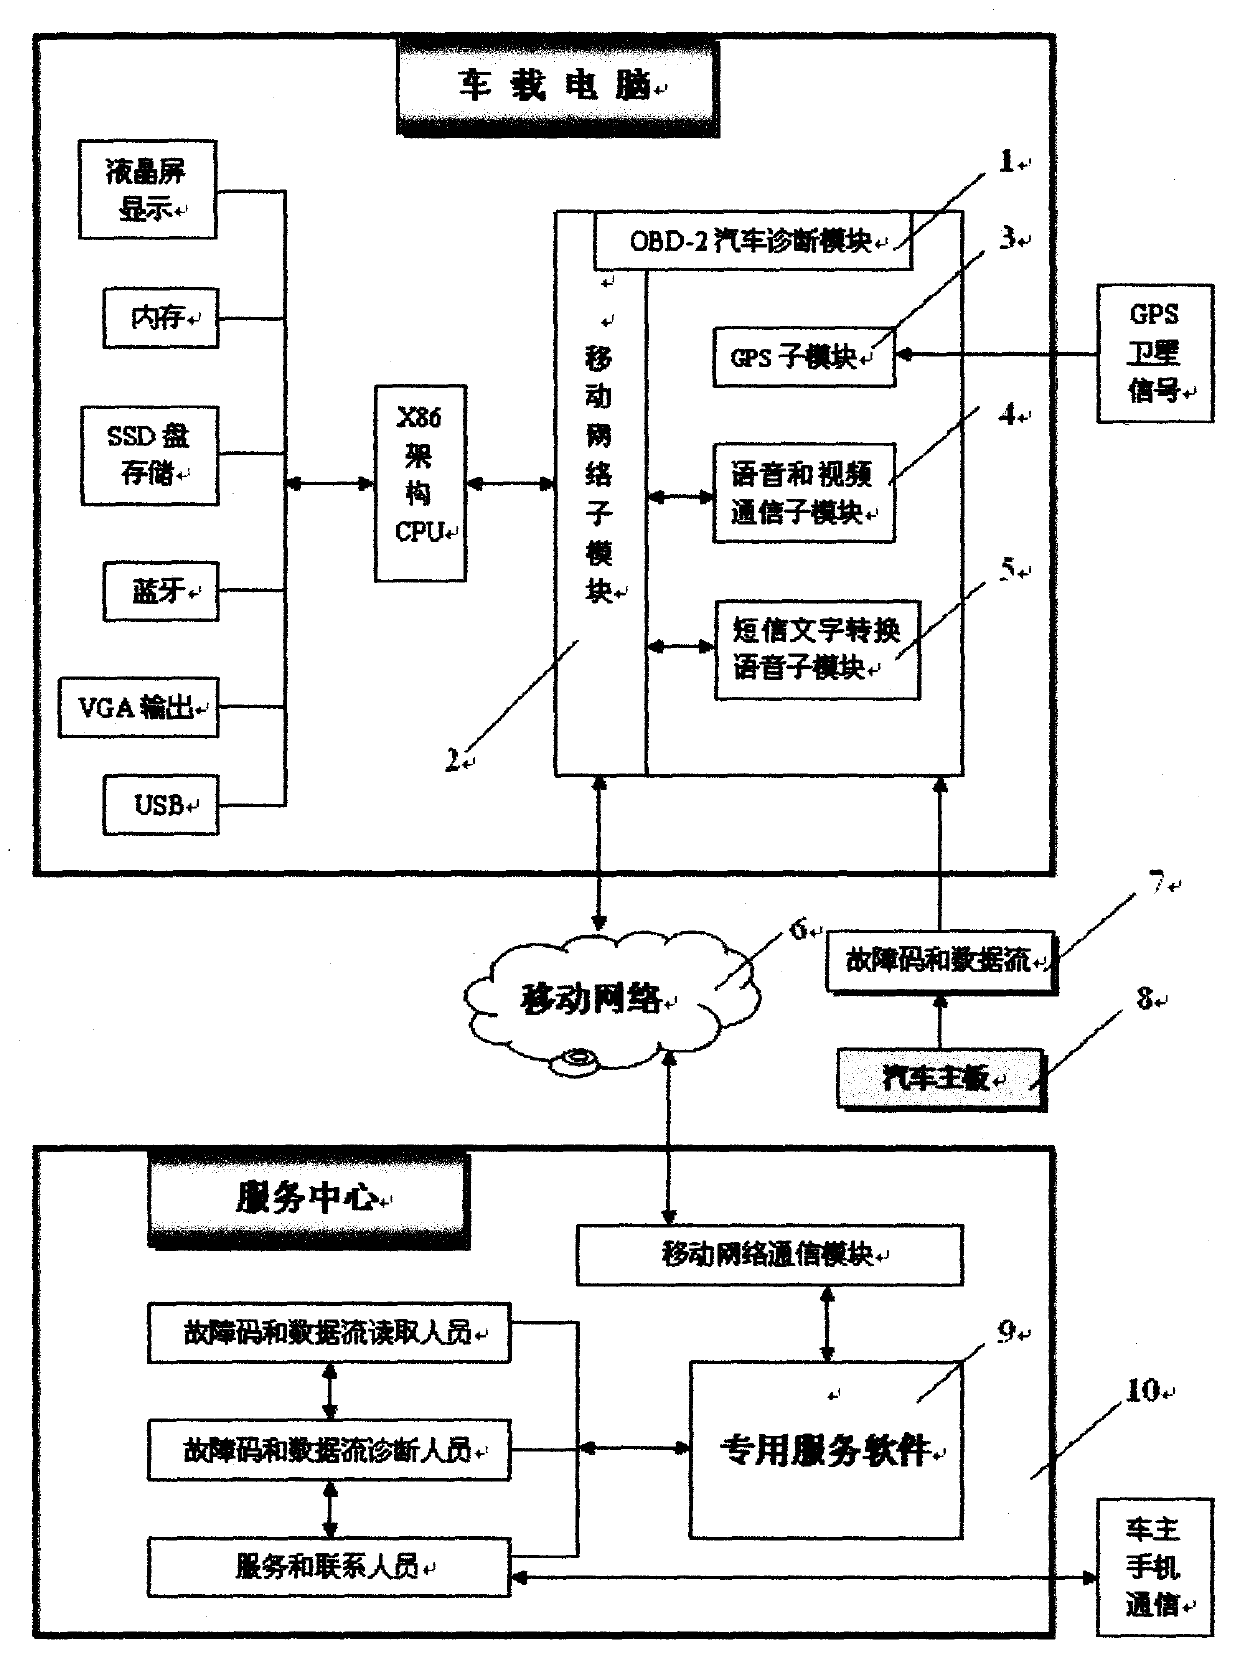 On-board computer and service center diagnosis system based on real-time information of communication network